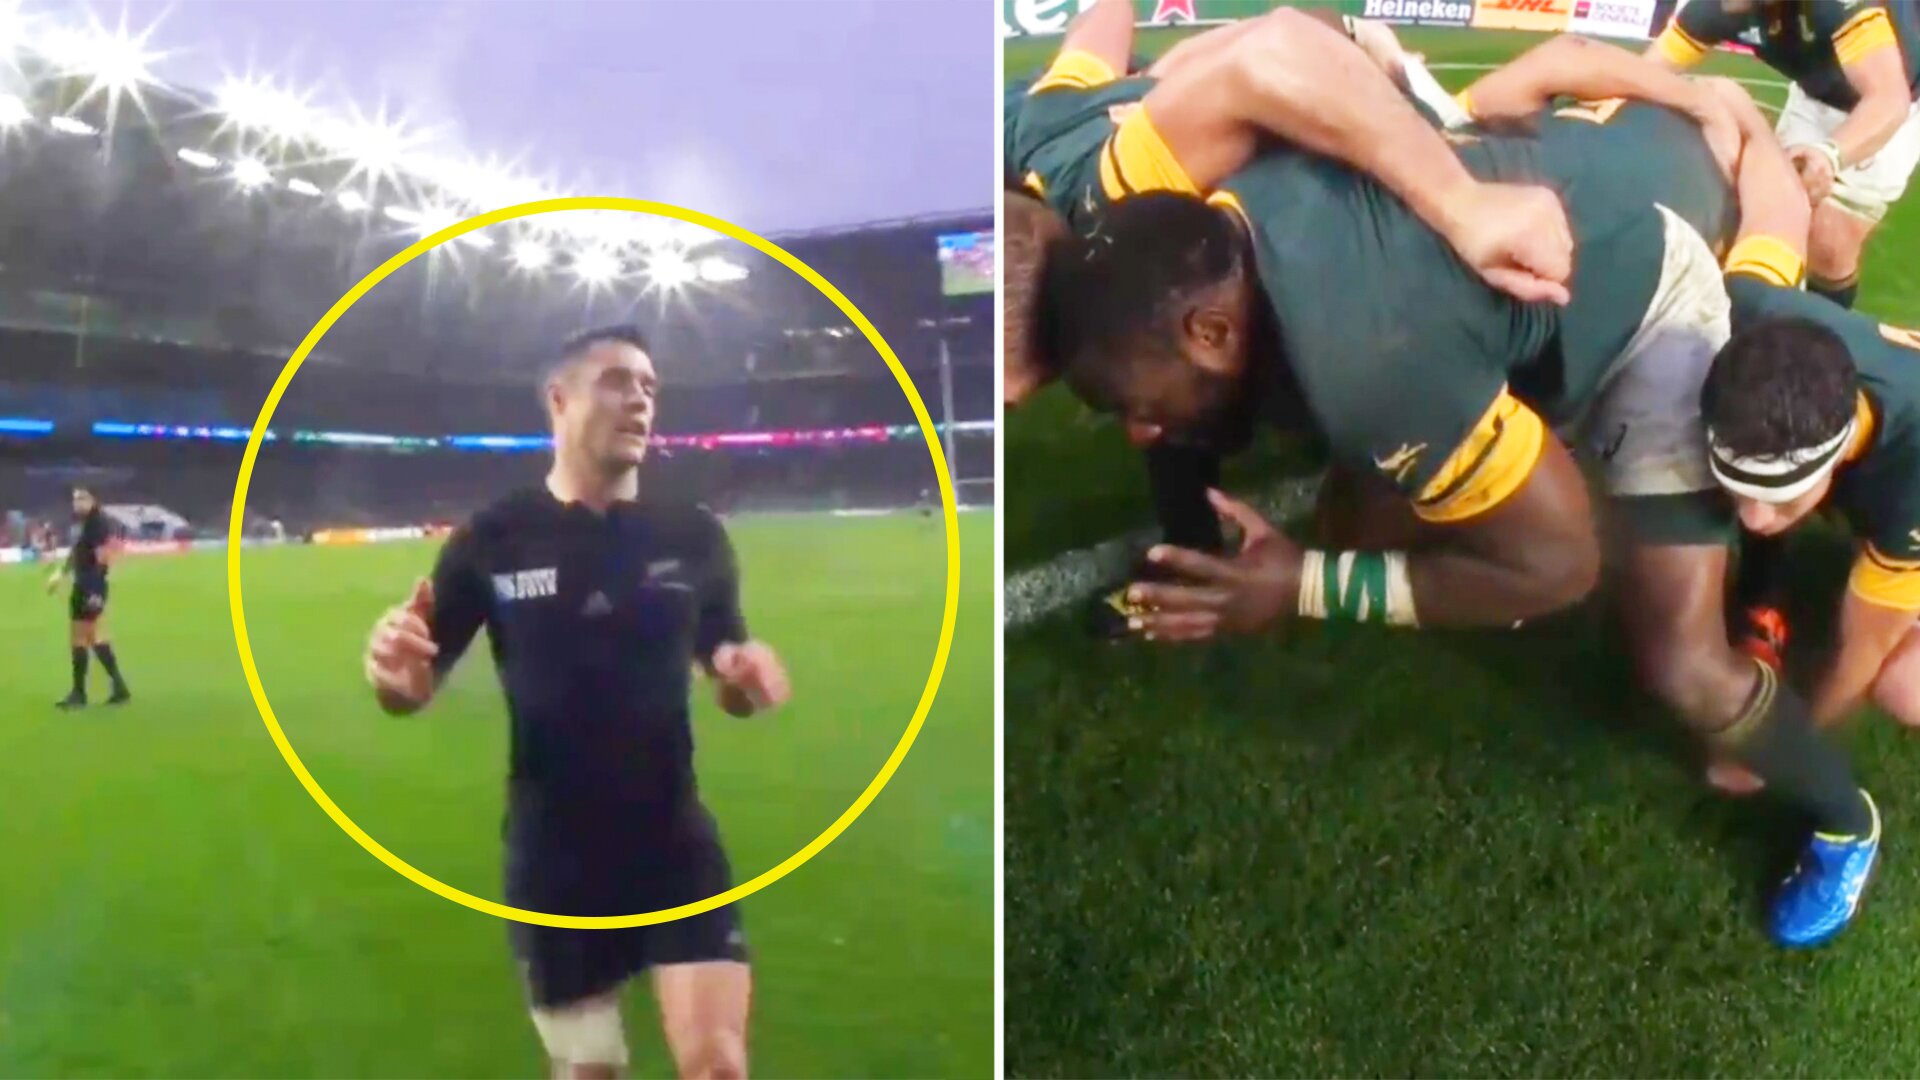 Previously unseen ref cam footage shows just how ferocious test match rugby can get